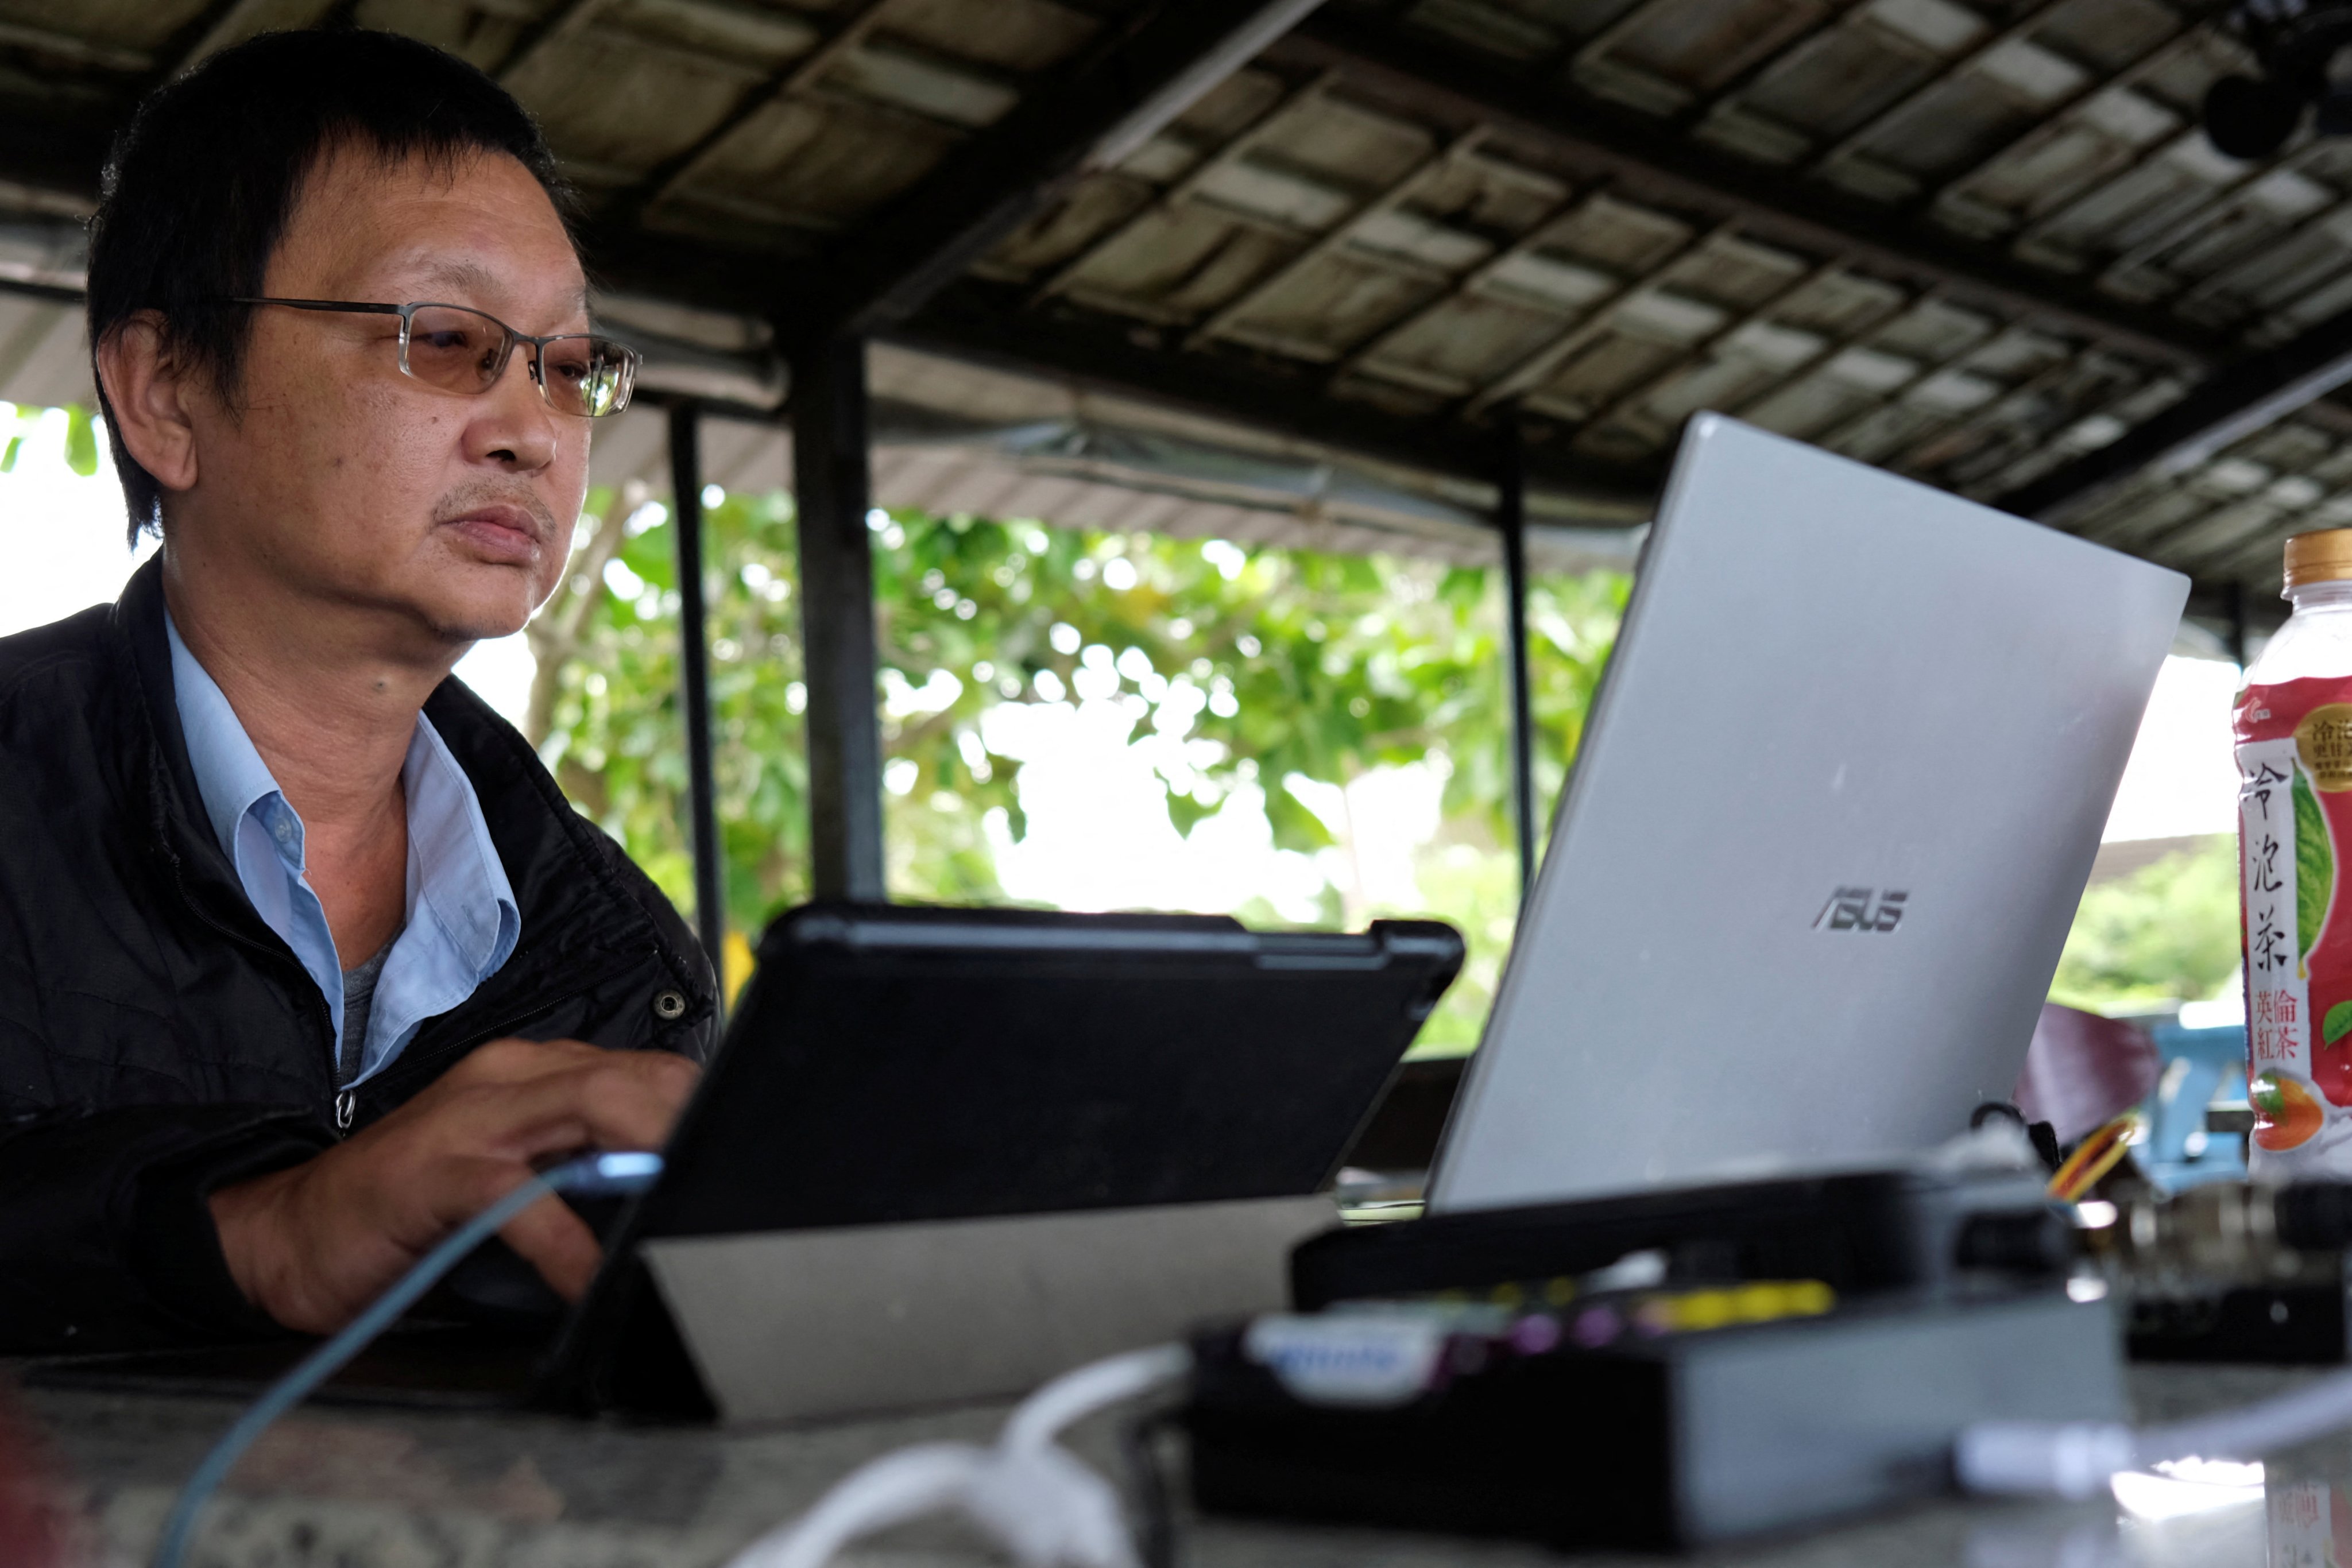 Radio enthusiast Robin Hsu, 50, monitors flight traffic in air space southwest of Taiwan, from a cafe in Pingtung, Taiwan on May 3, 2022. He says: “The Chinese Communist planes are like flies on your dining table. If you kill them on your plate then your meal is ruined. All you can do is to wave them away.” Photo: Reuters